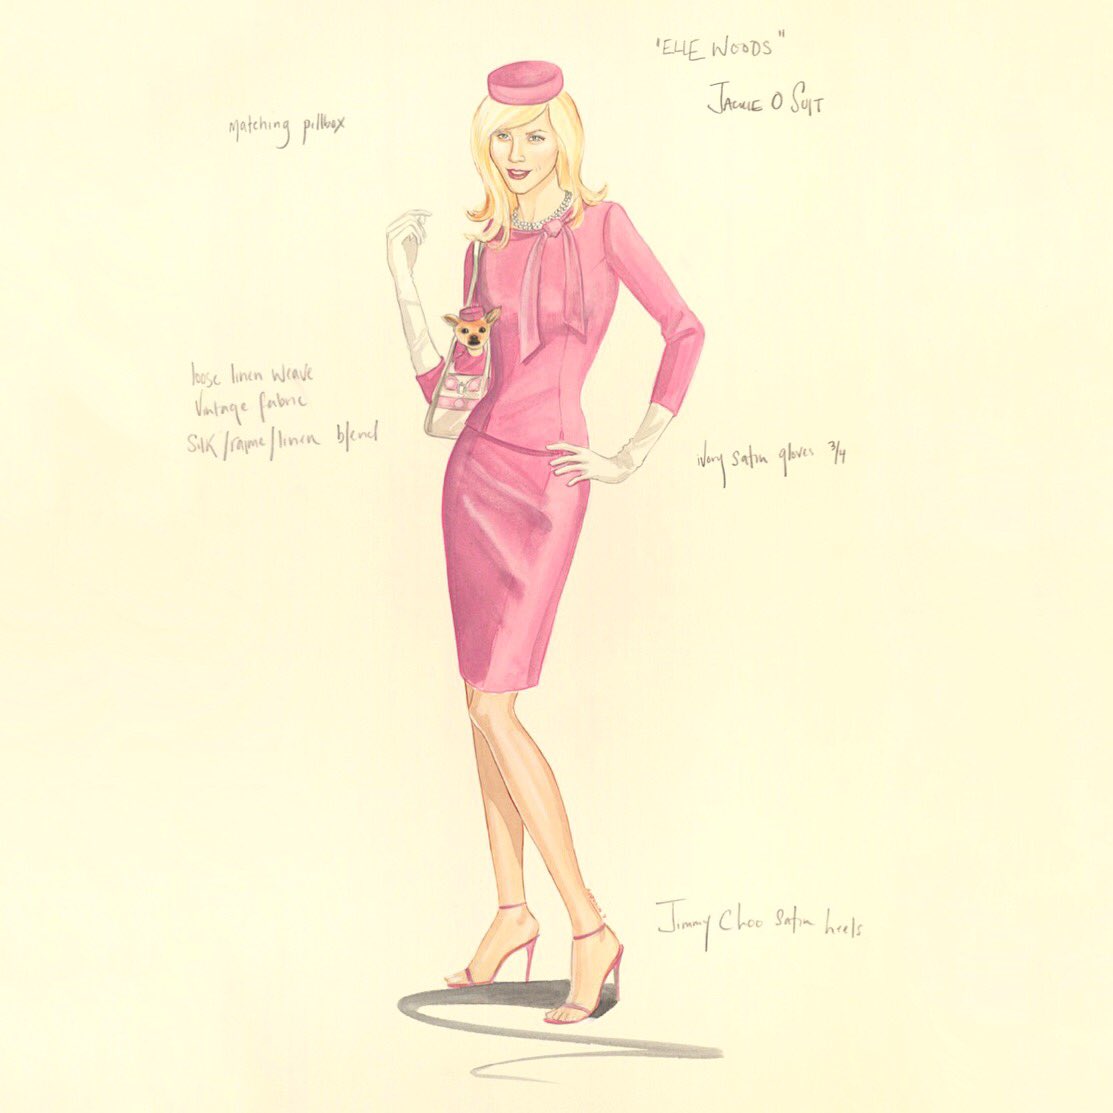 Capitol Barbie! ???????? #TBT to @SophieDeRakoff's gorgeous designs for #ElleWoods #LegallyBlonde2 #FashionDesign #JackieO https://t.co/2mYLzv2HmI